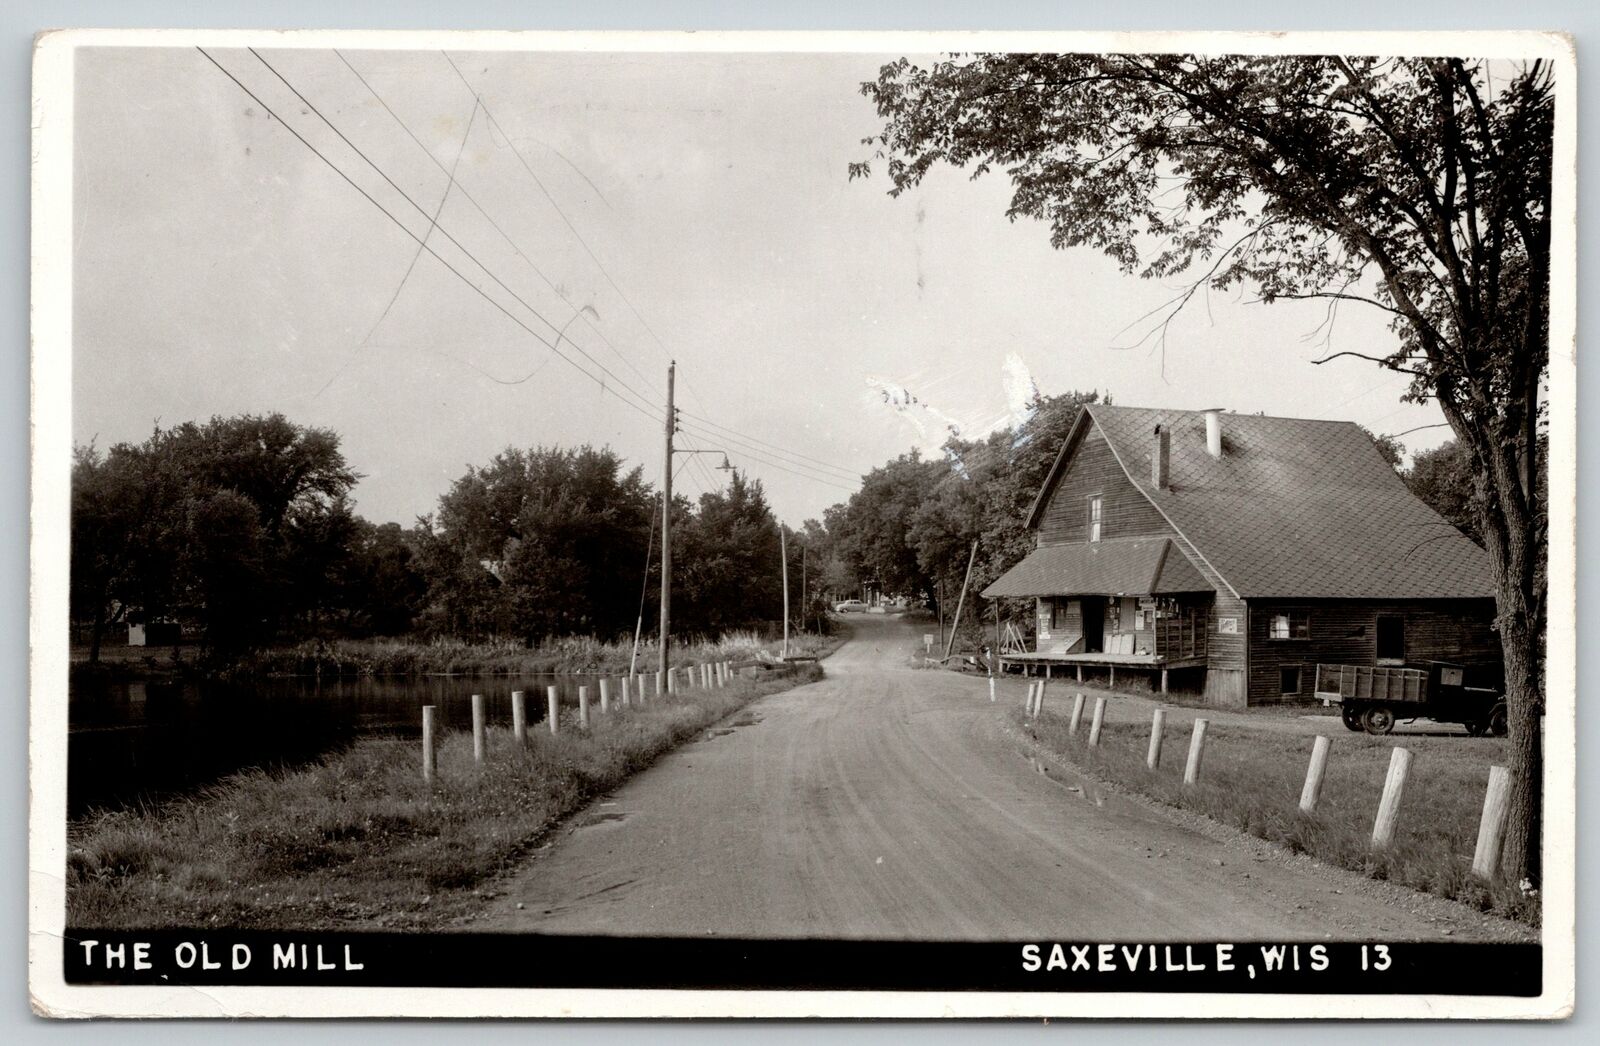 Saxeville Wisconsin~1940s Crate Bed Pickup Truck~Old Mill Store~Gravel Road~RPPC